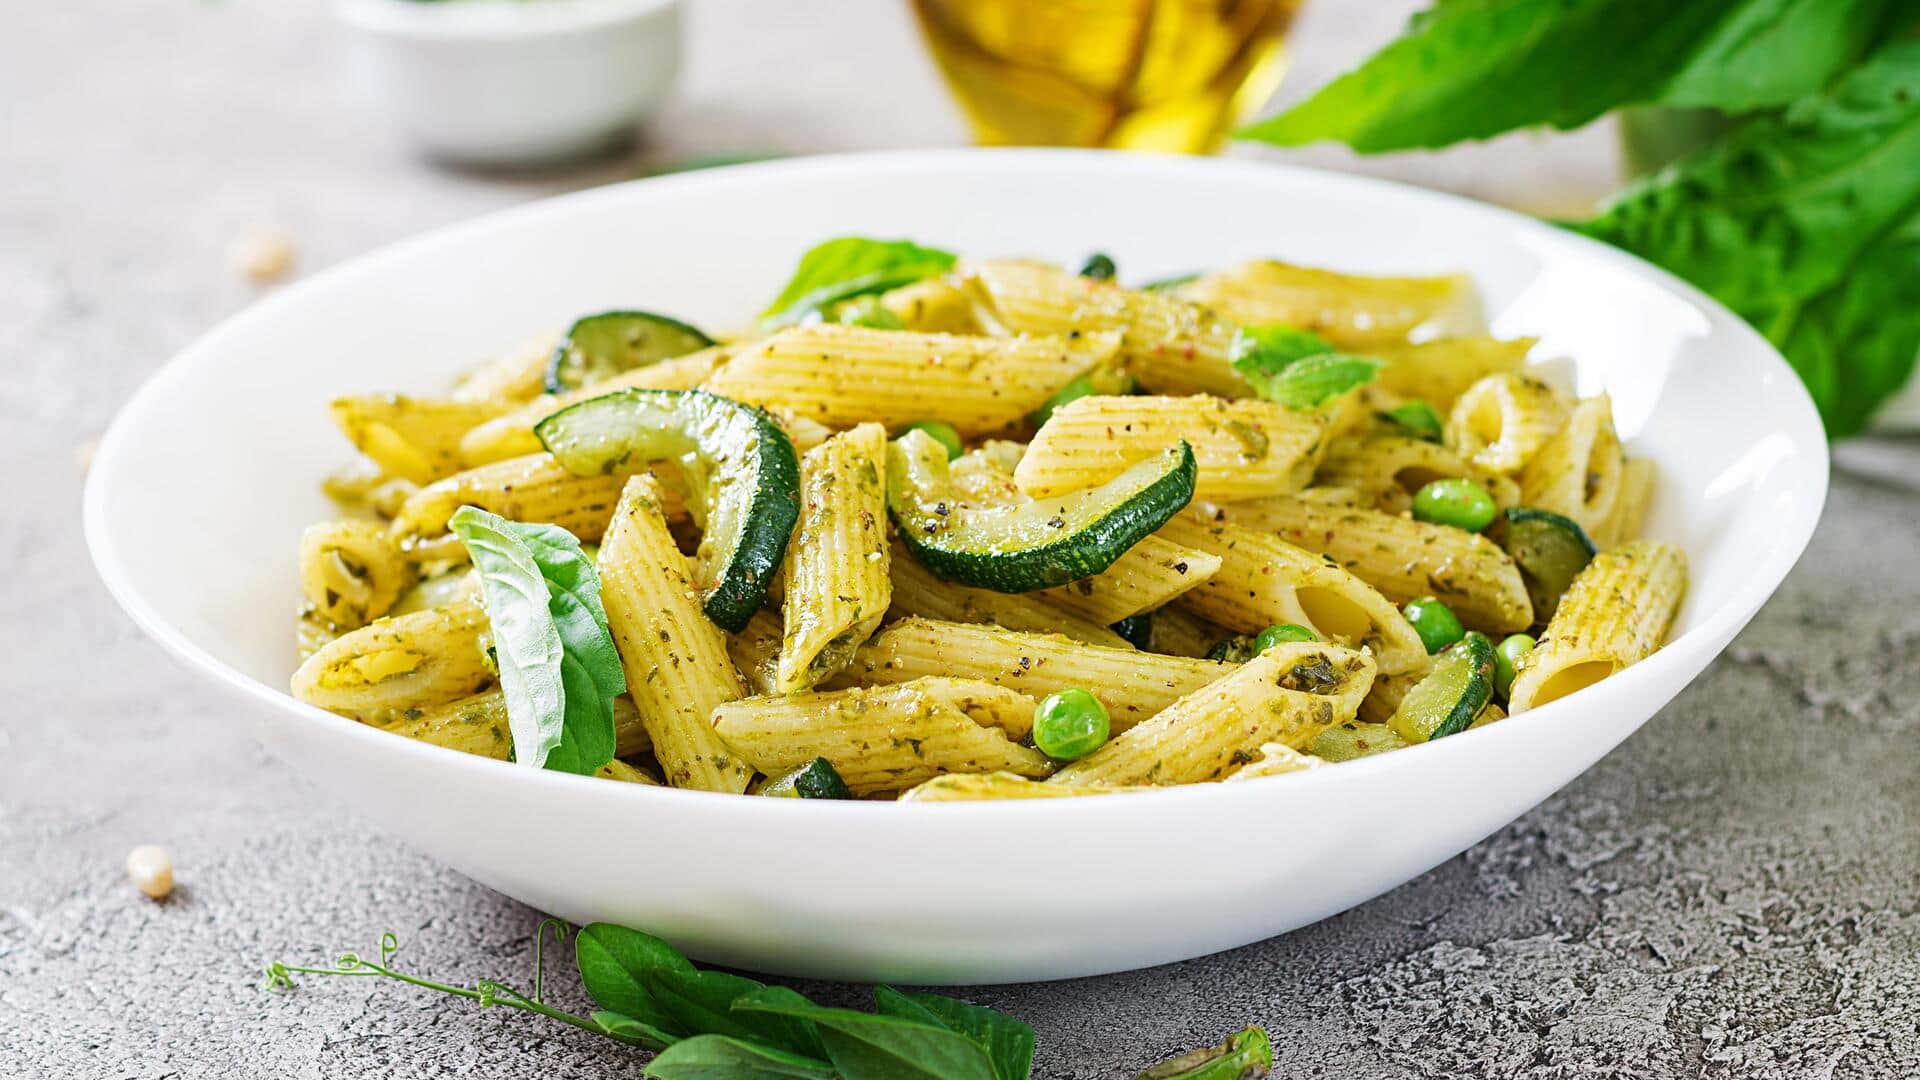 National Pasta Day: How to make vegan pasta from scratch